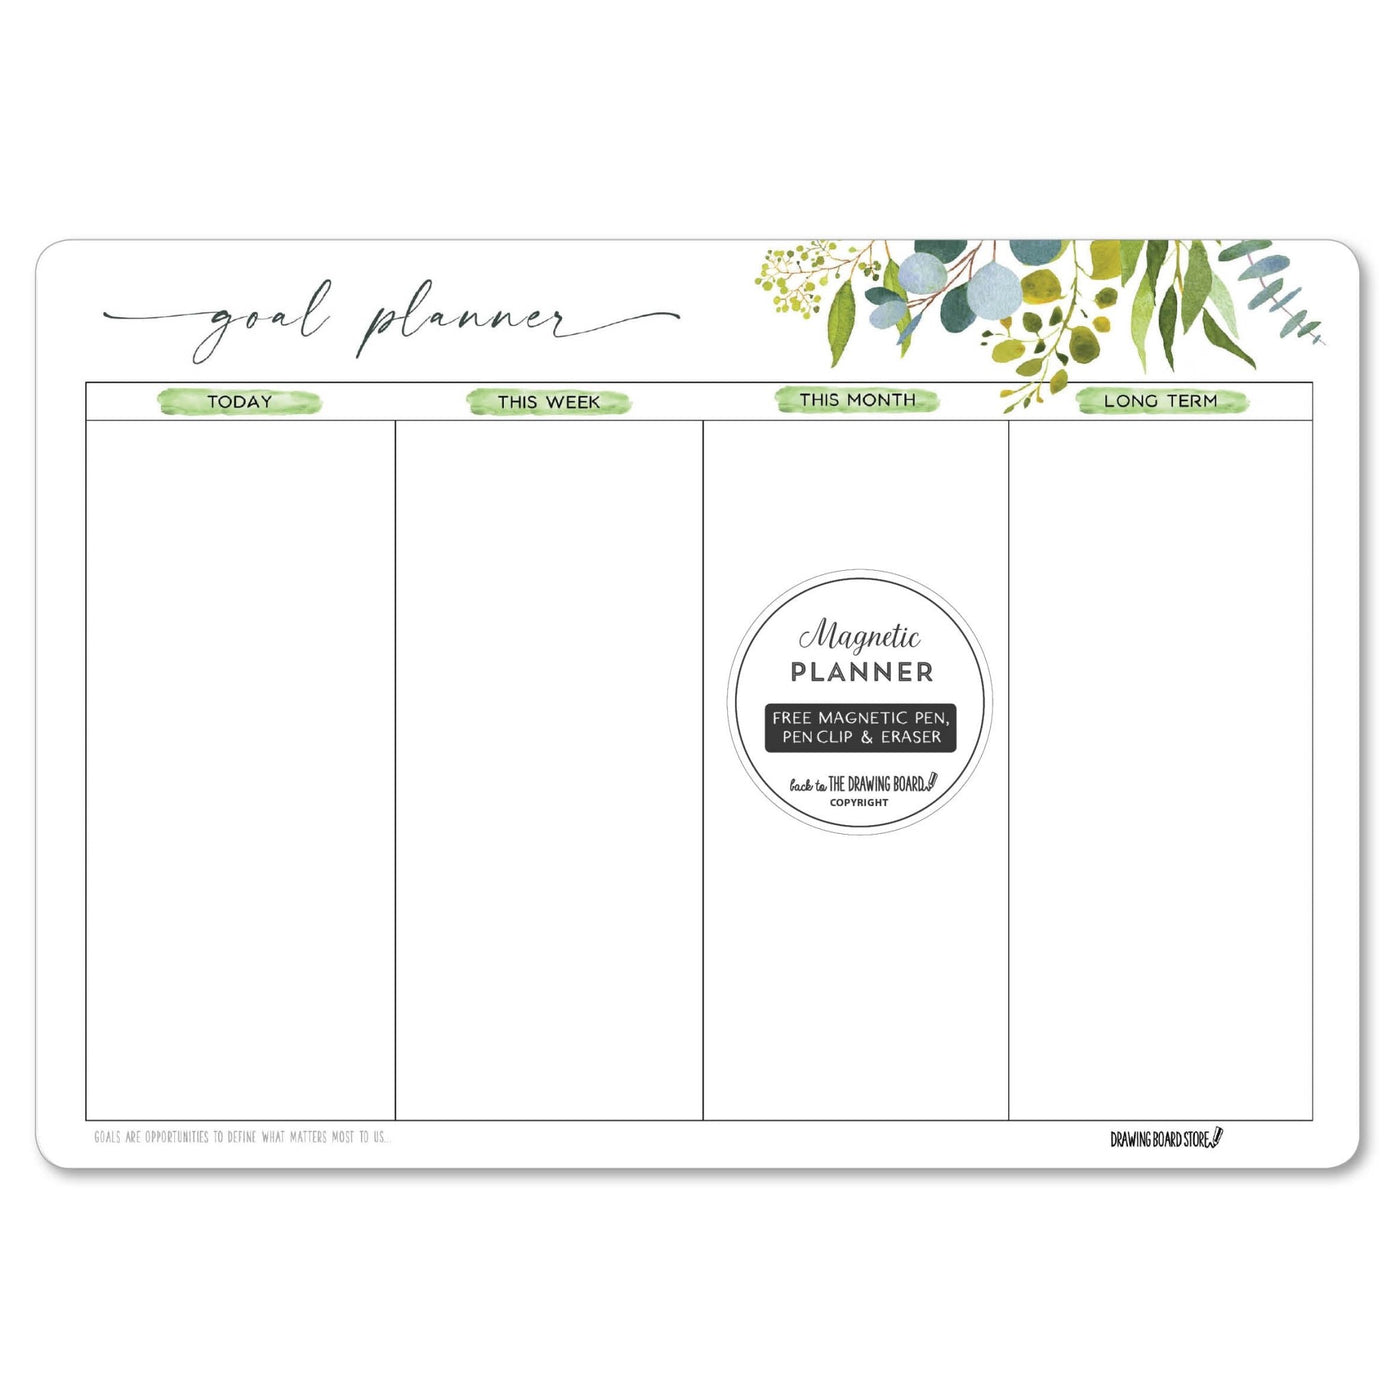 Goal Planners - Drawing Board Store